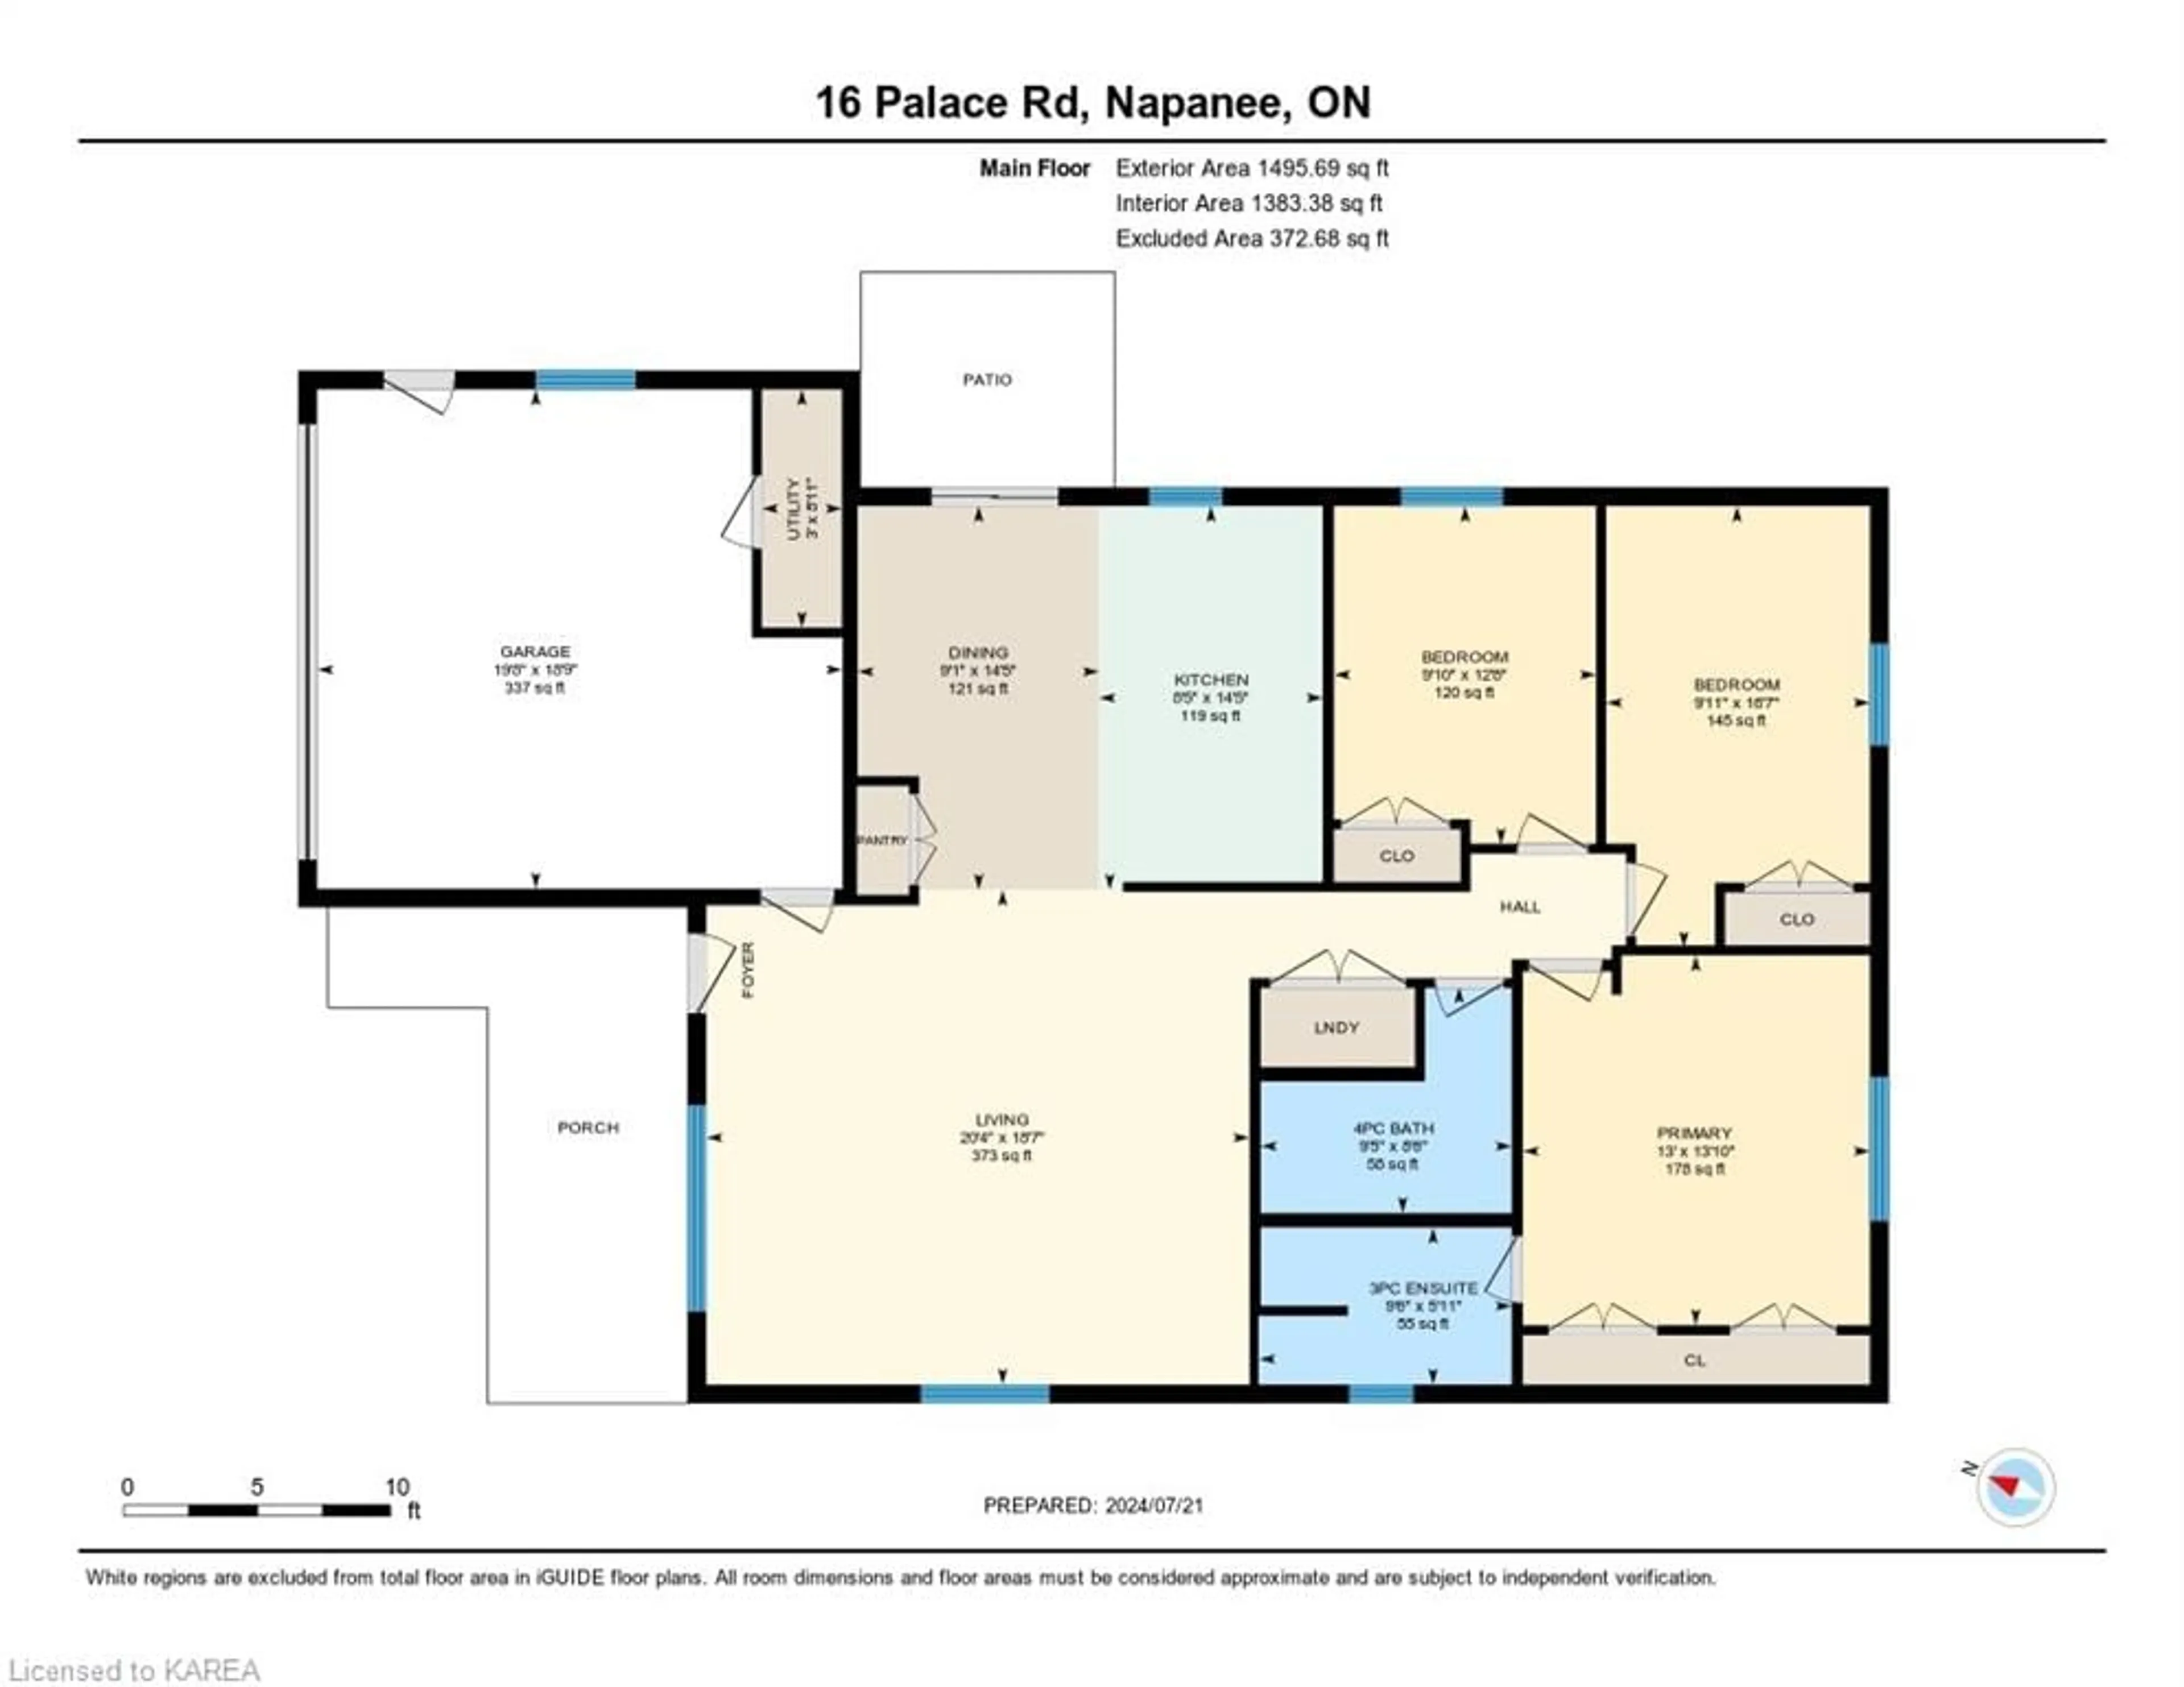 Floor plan for 16 Palace Rd, Napanee Ontario K7R 1A3